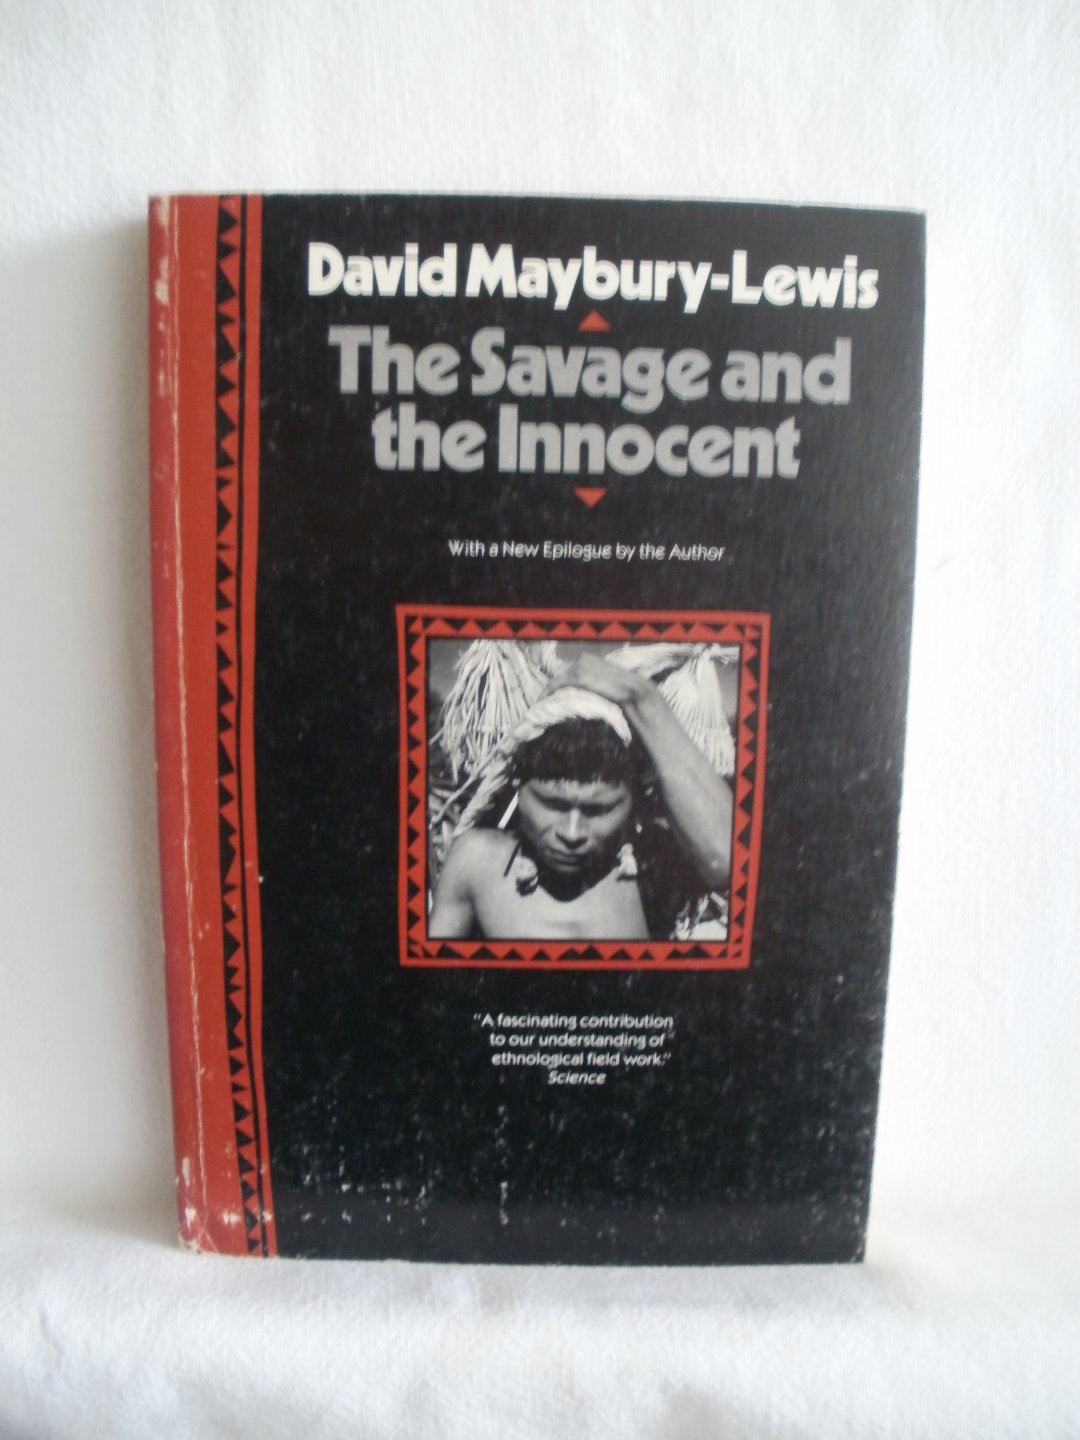 Maybury-Lewis, David - The Savage and the Innocent. With a new Epilogue by the Author.